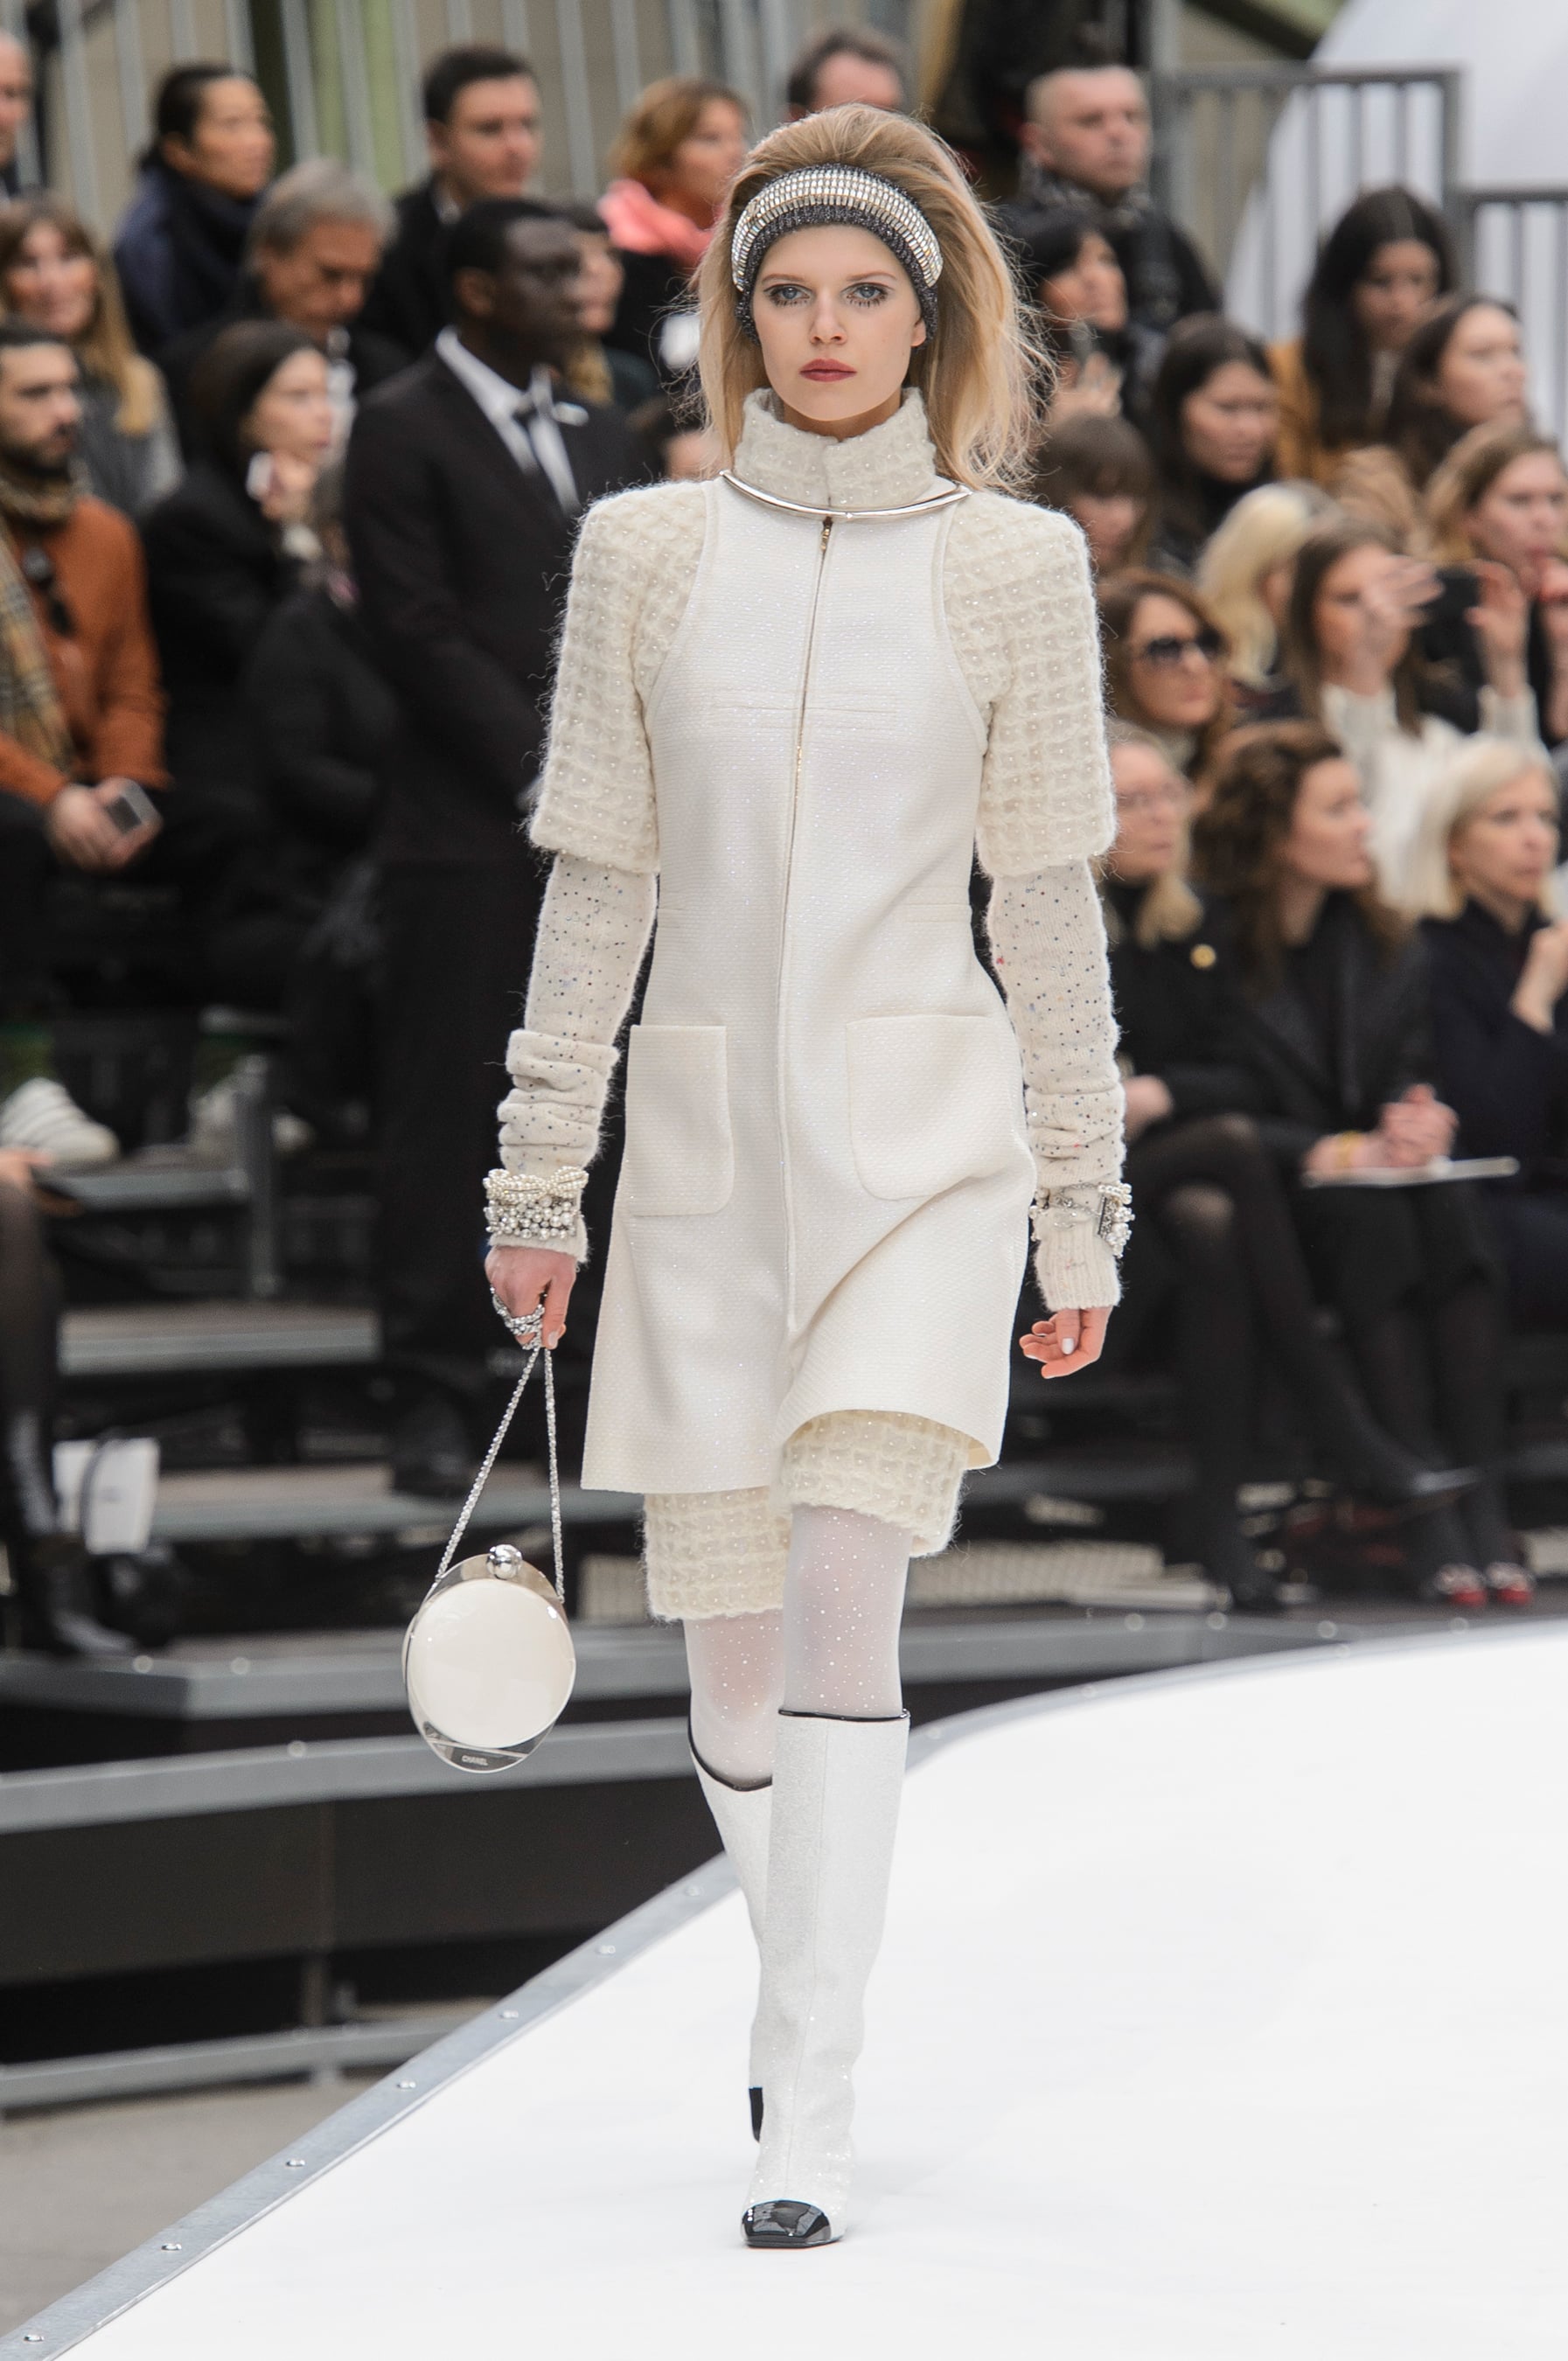 Fashion, Shopping & Style | Karl Lagerfeld Shows Us What the Chanel Uniform  Looks Like in Space | POPSUGAR Fashion Photo 23